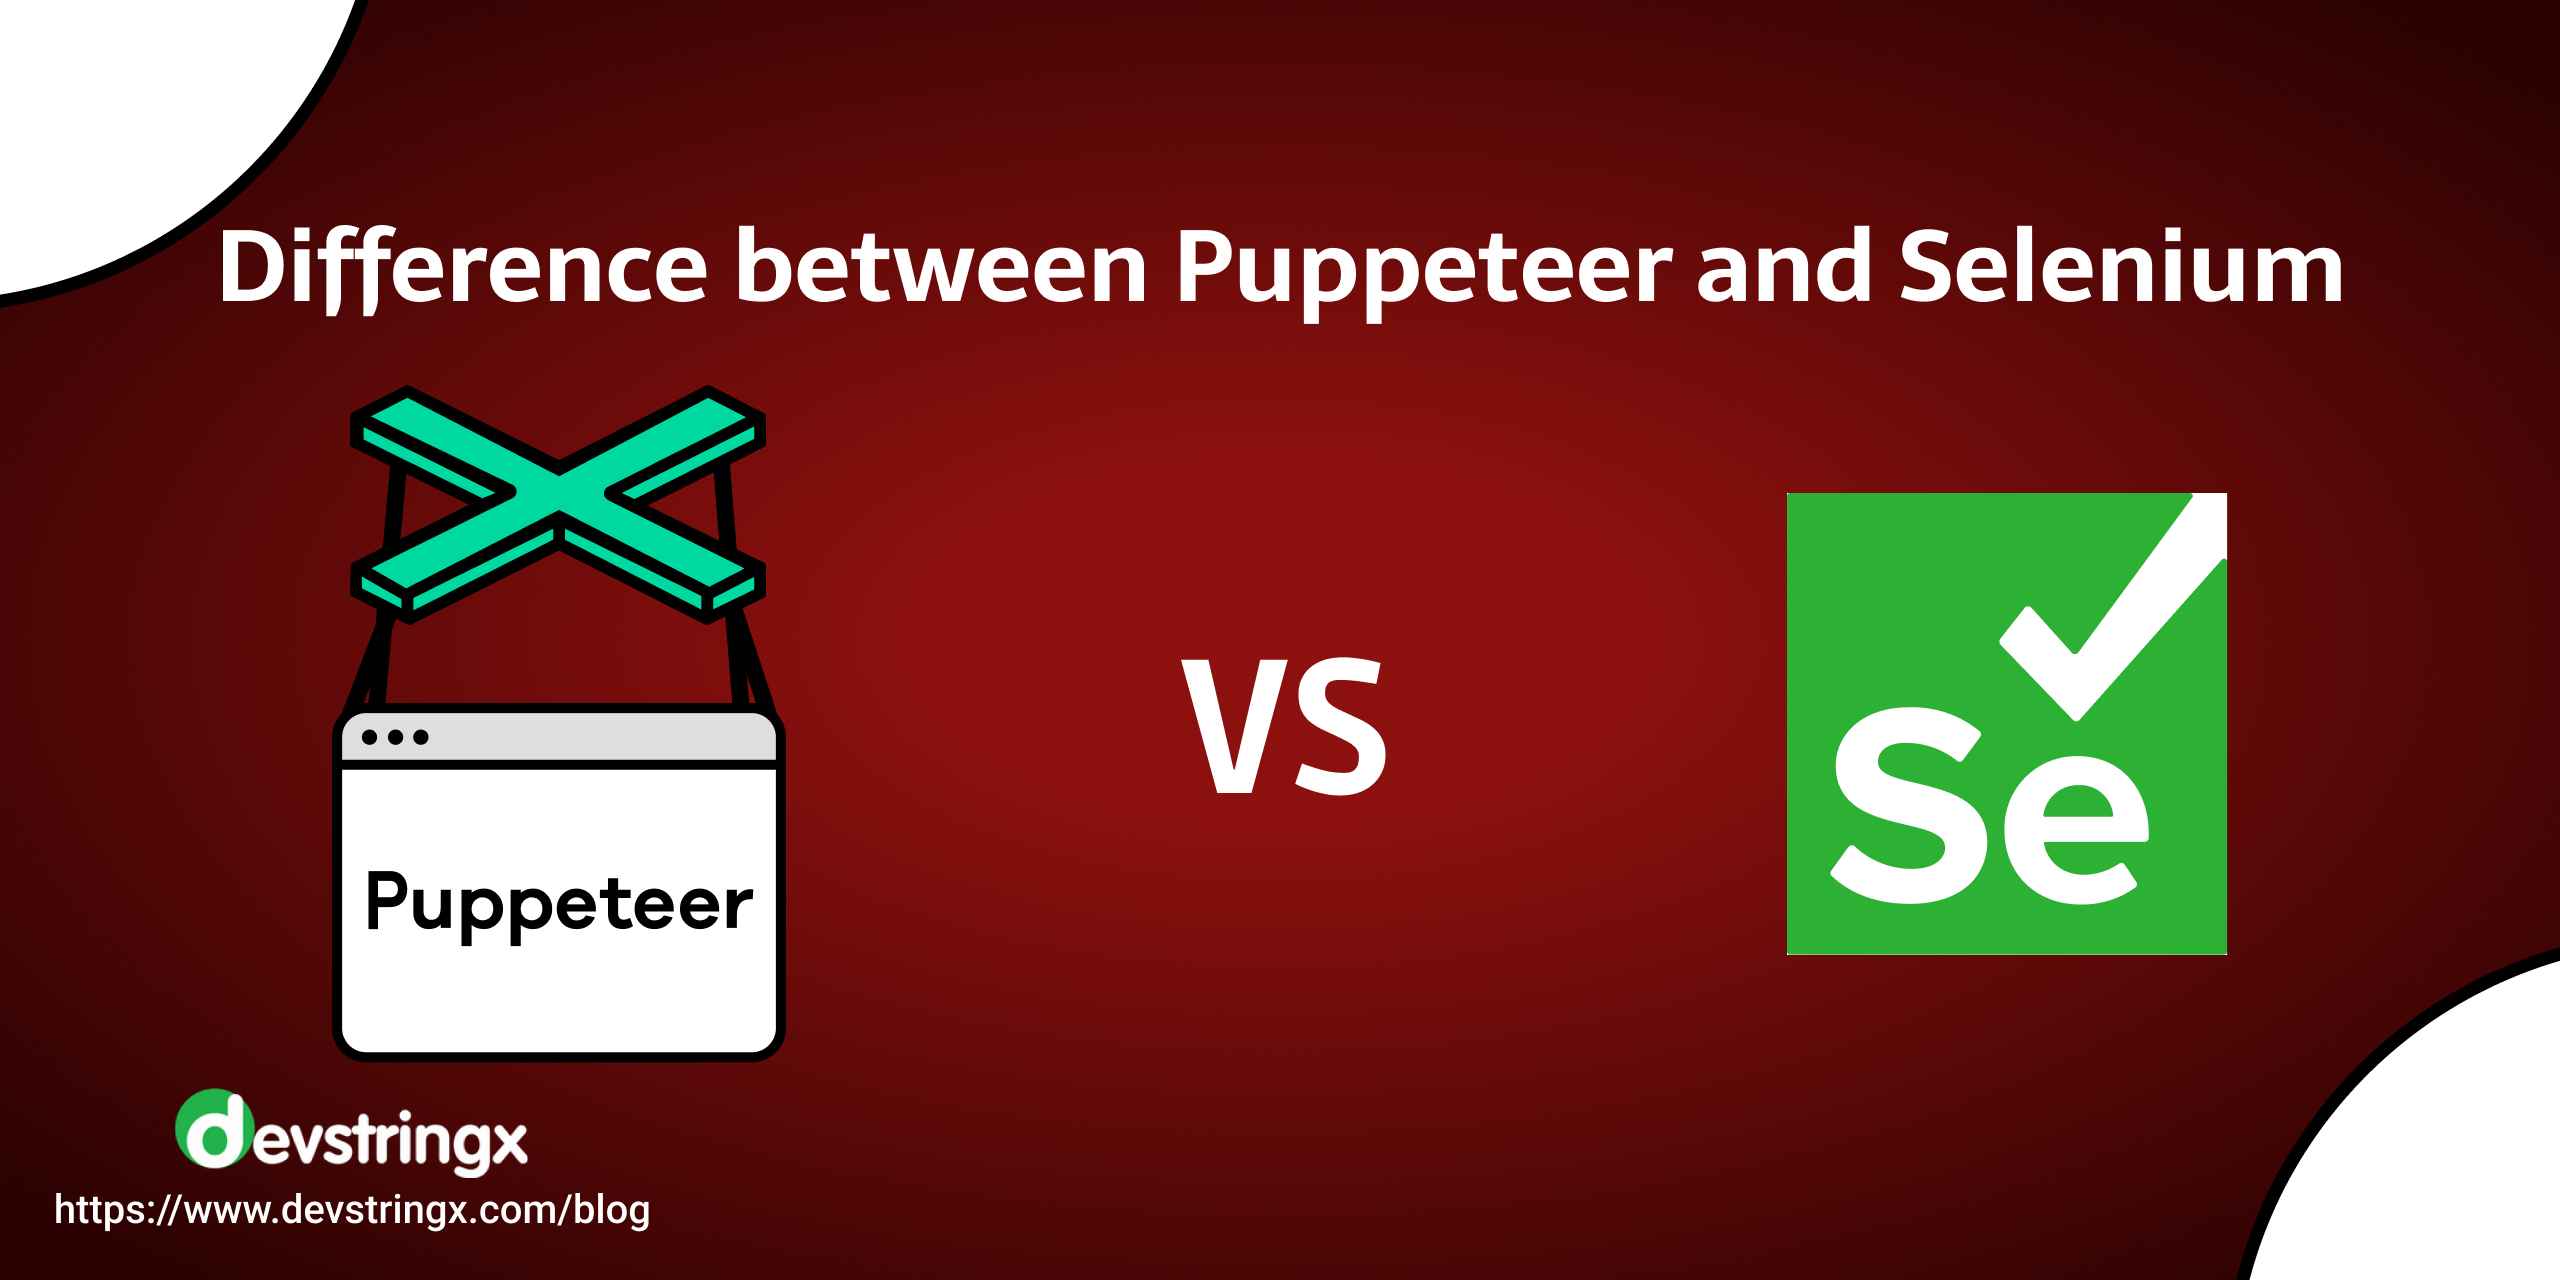 Puppeteer vs Selenium: Core Differences